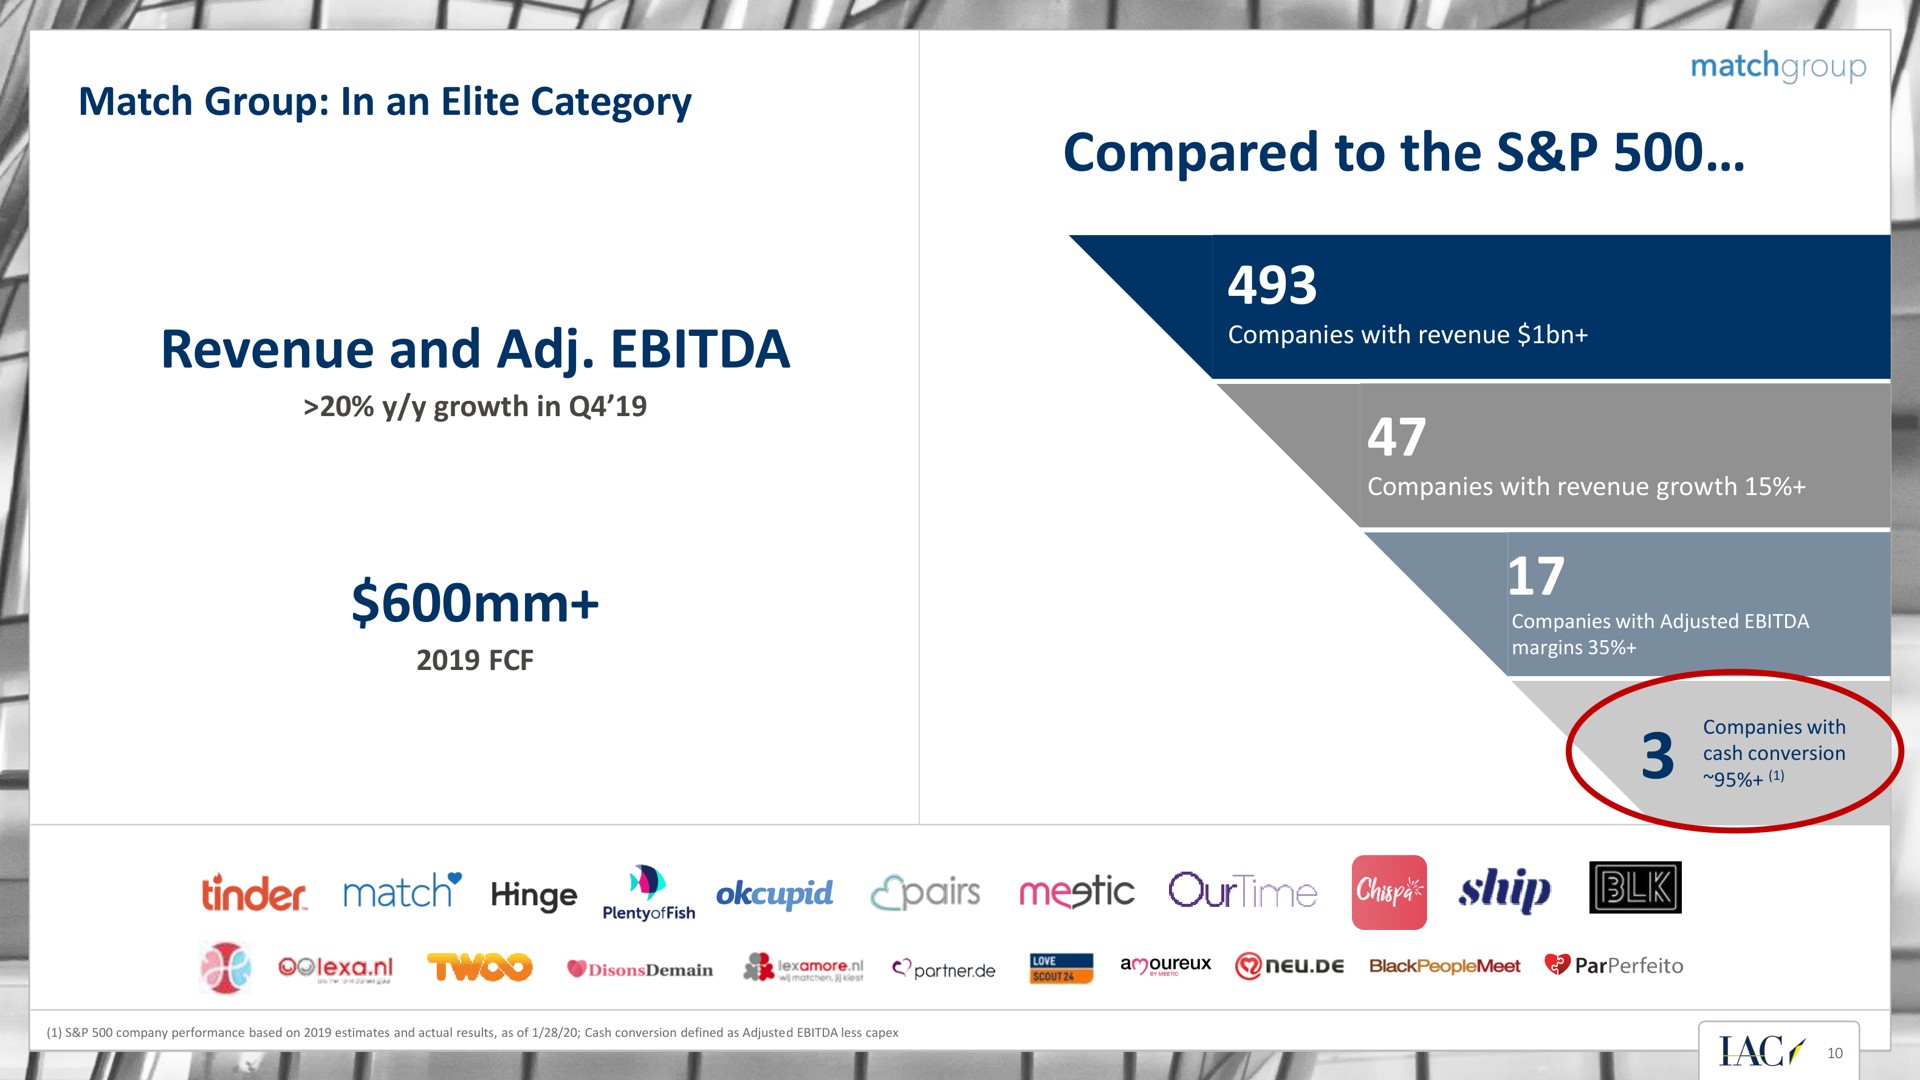 match group in an elite category revenue and compared to the i i i i a tinder hinge pairs ship | IAC